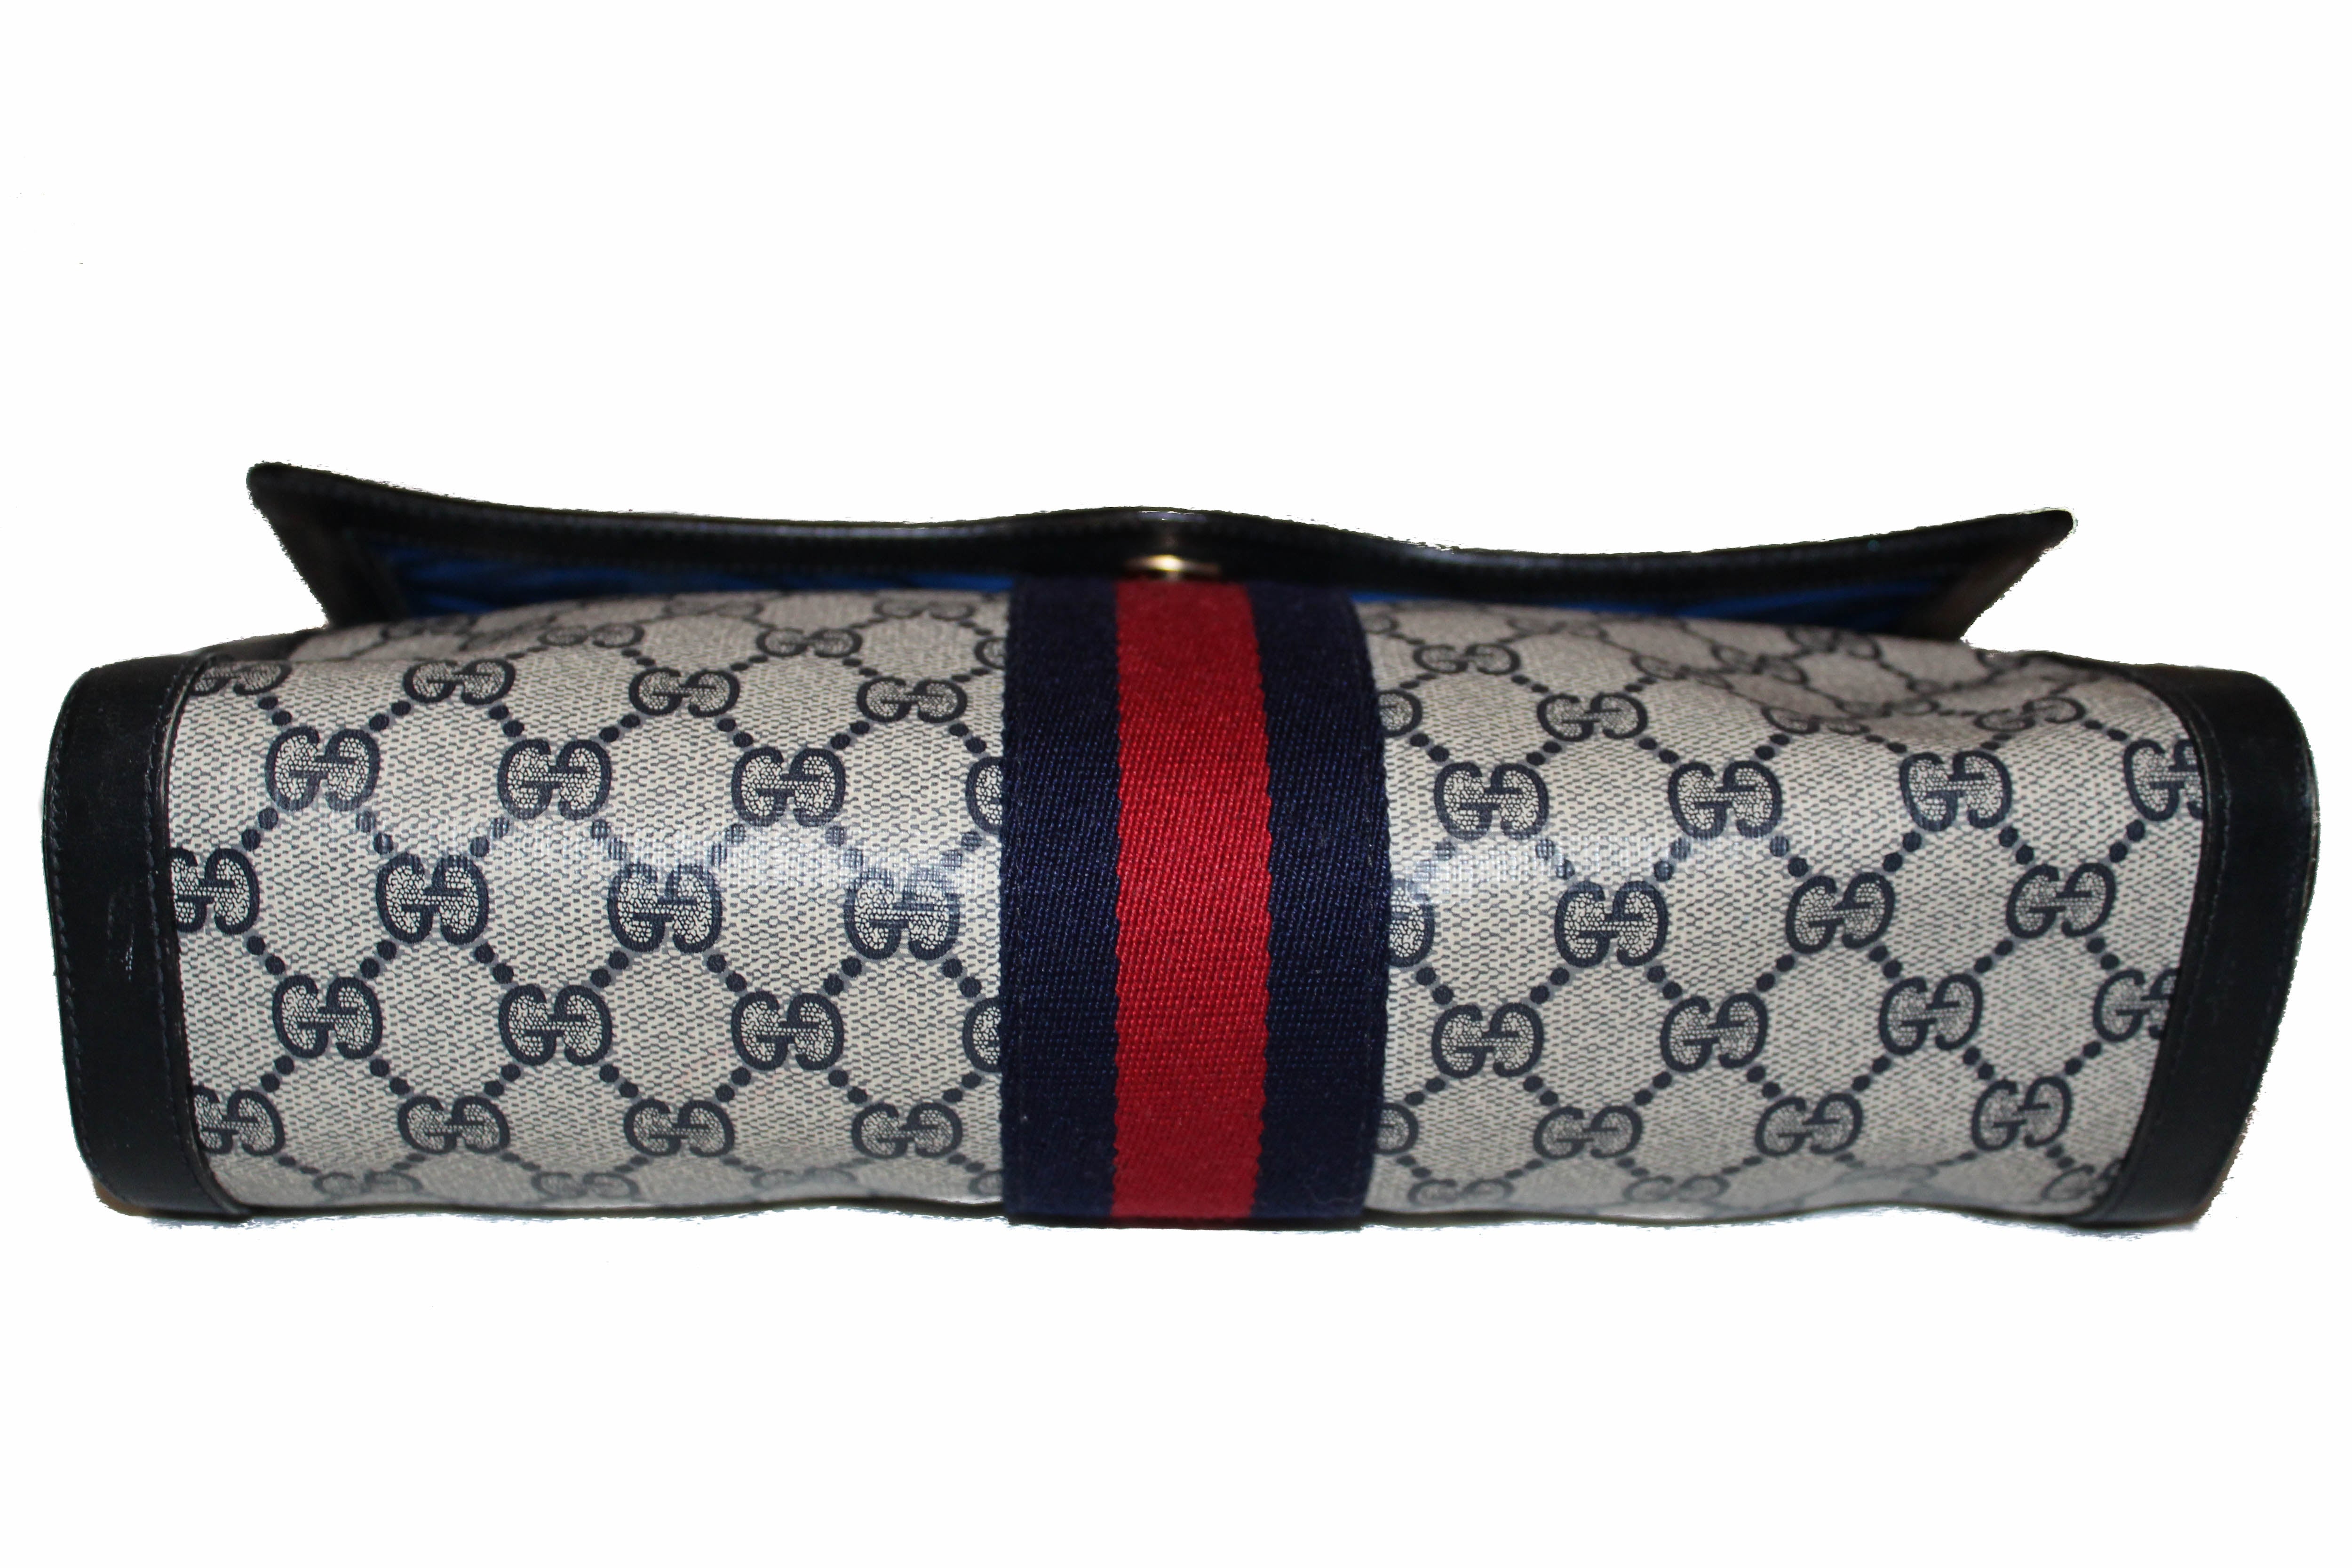 Authentic Gucci Vintage Blue and Red Web Clutch